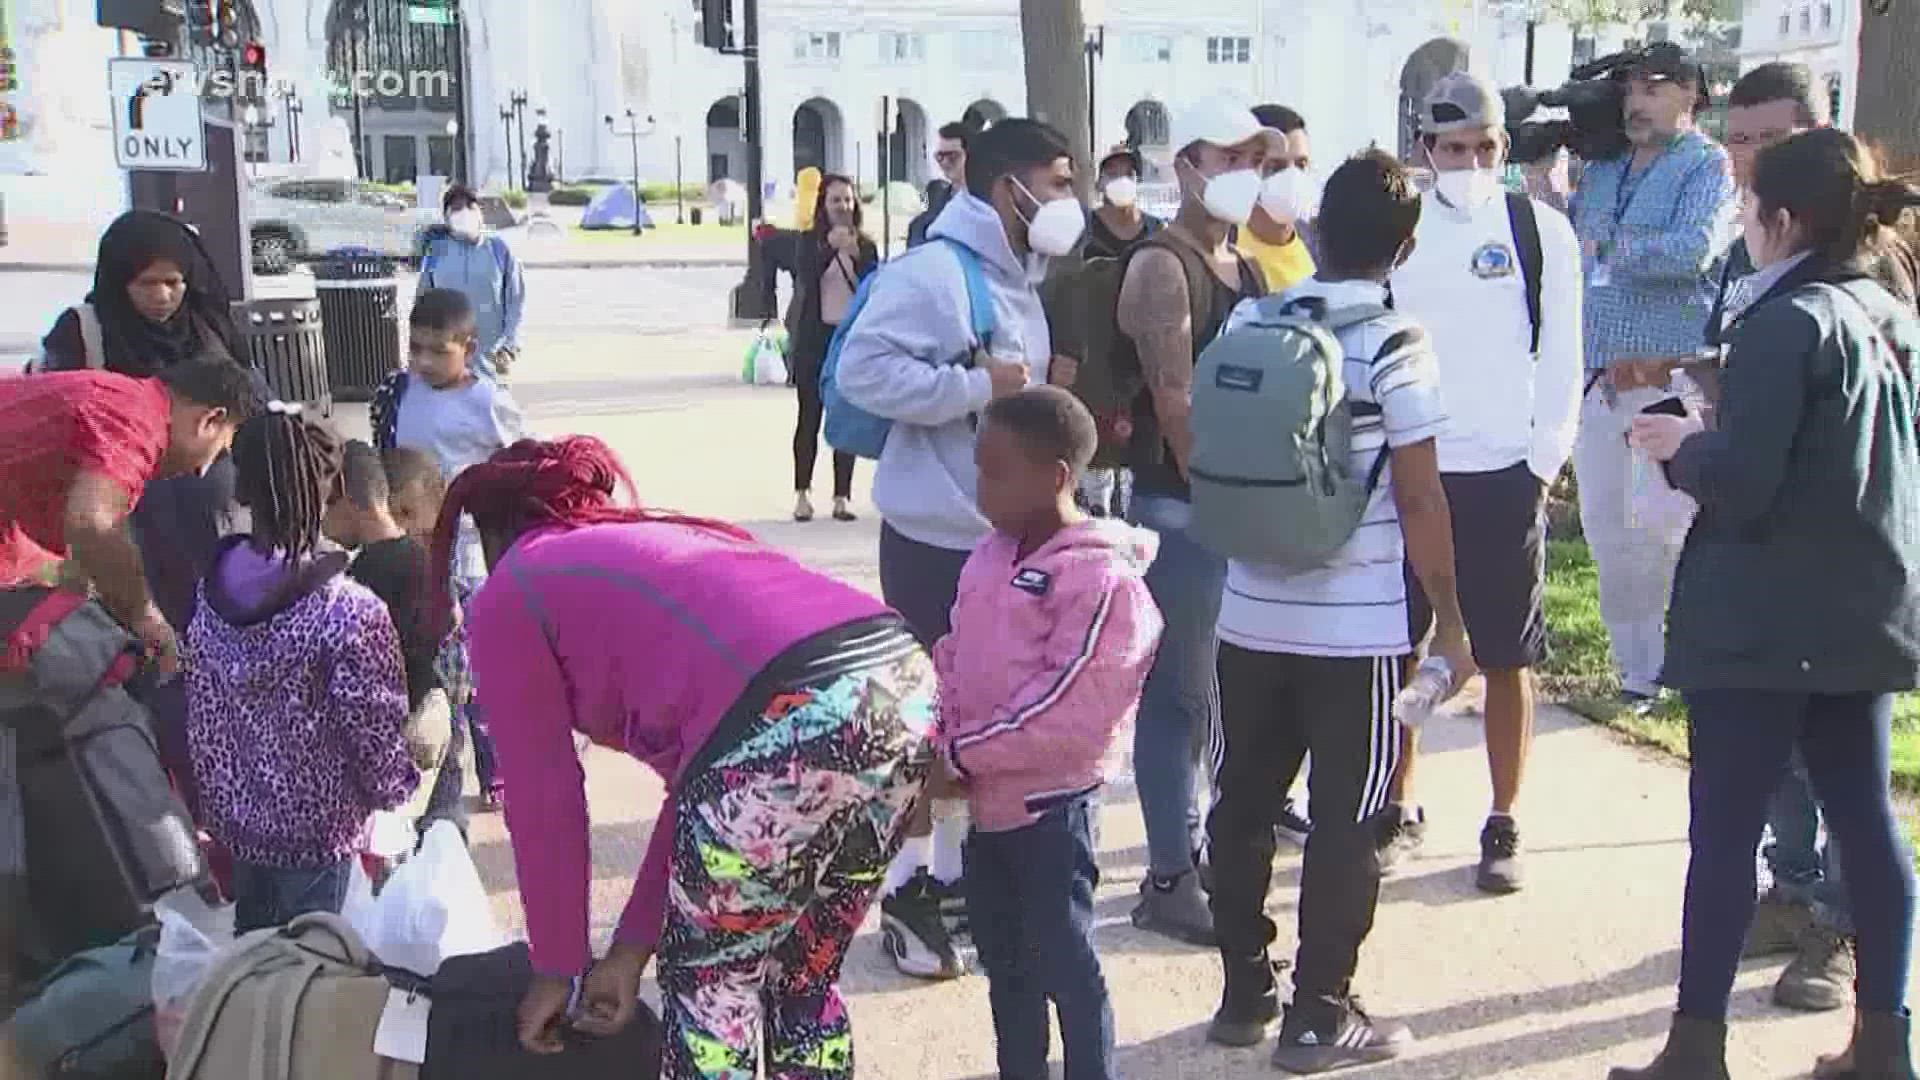 Agencies say they're working to give fair treatment to the migrants.